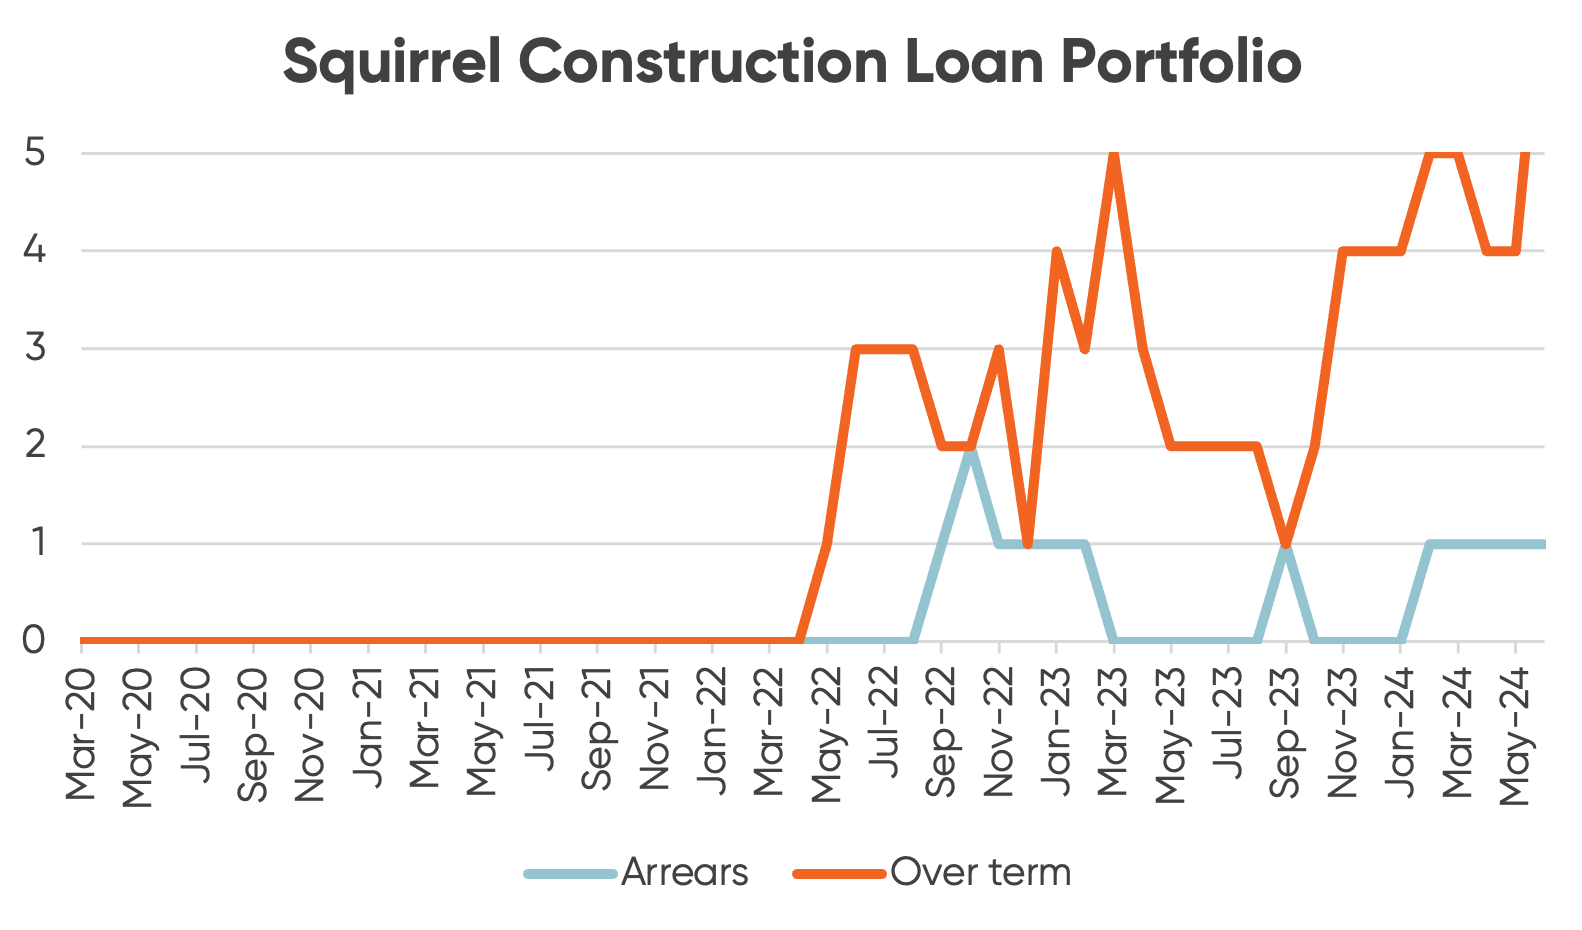 Graph showing loans in arrears and over term in Squirrel's Construction Loan Portfolio